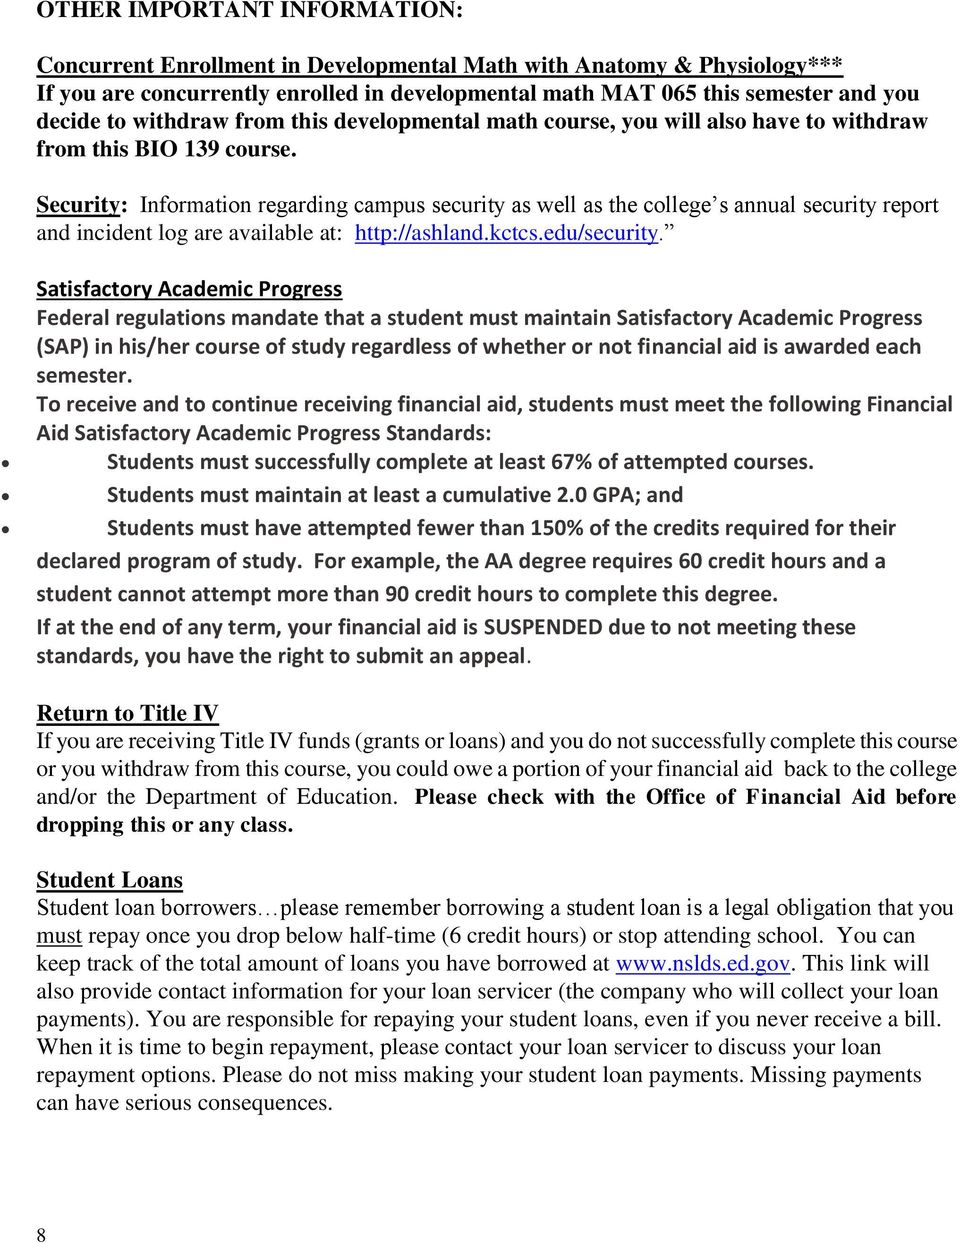 Security: Information regarding campus security as well as the college s annual security report and incident log are available at: http://ashland.kctcs.edu/security.